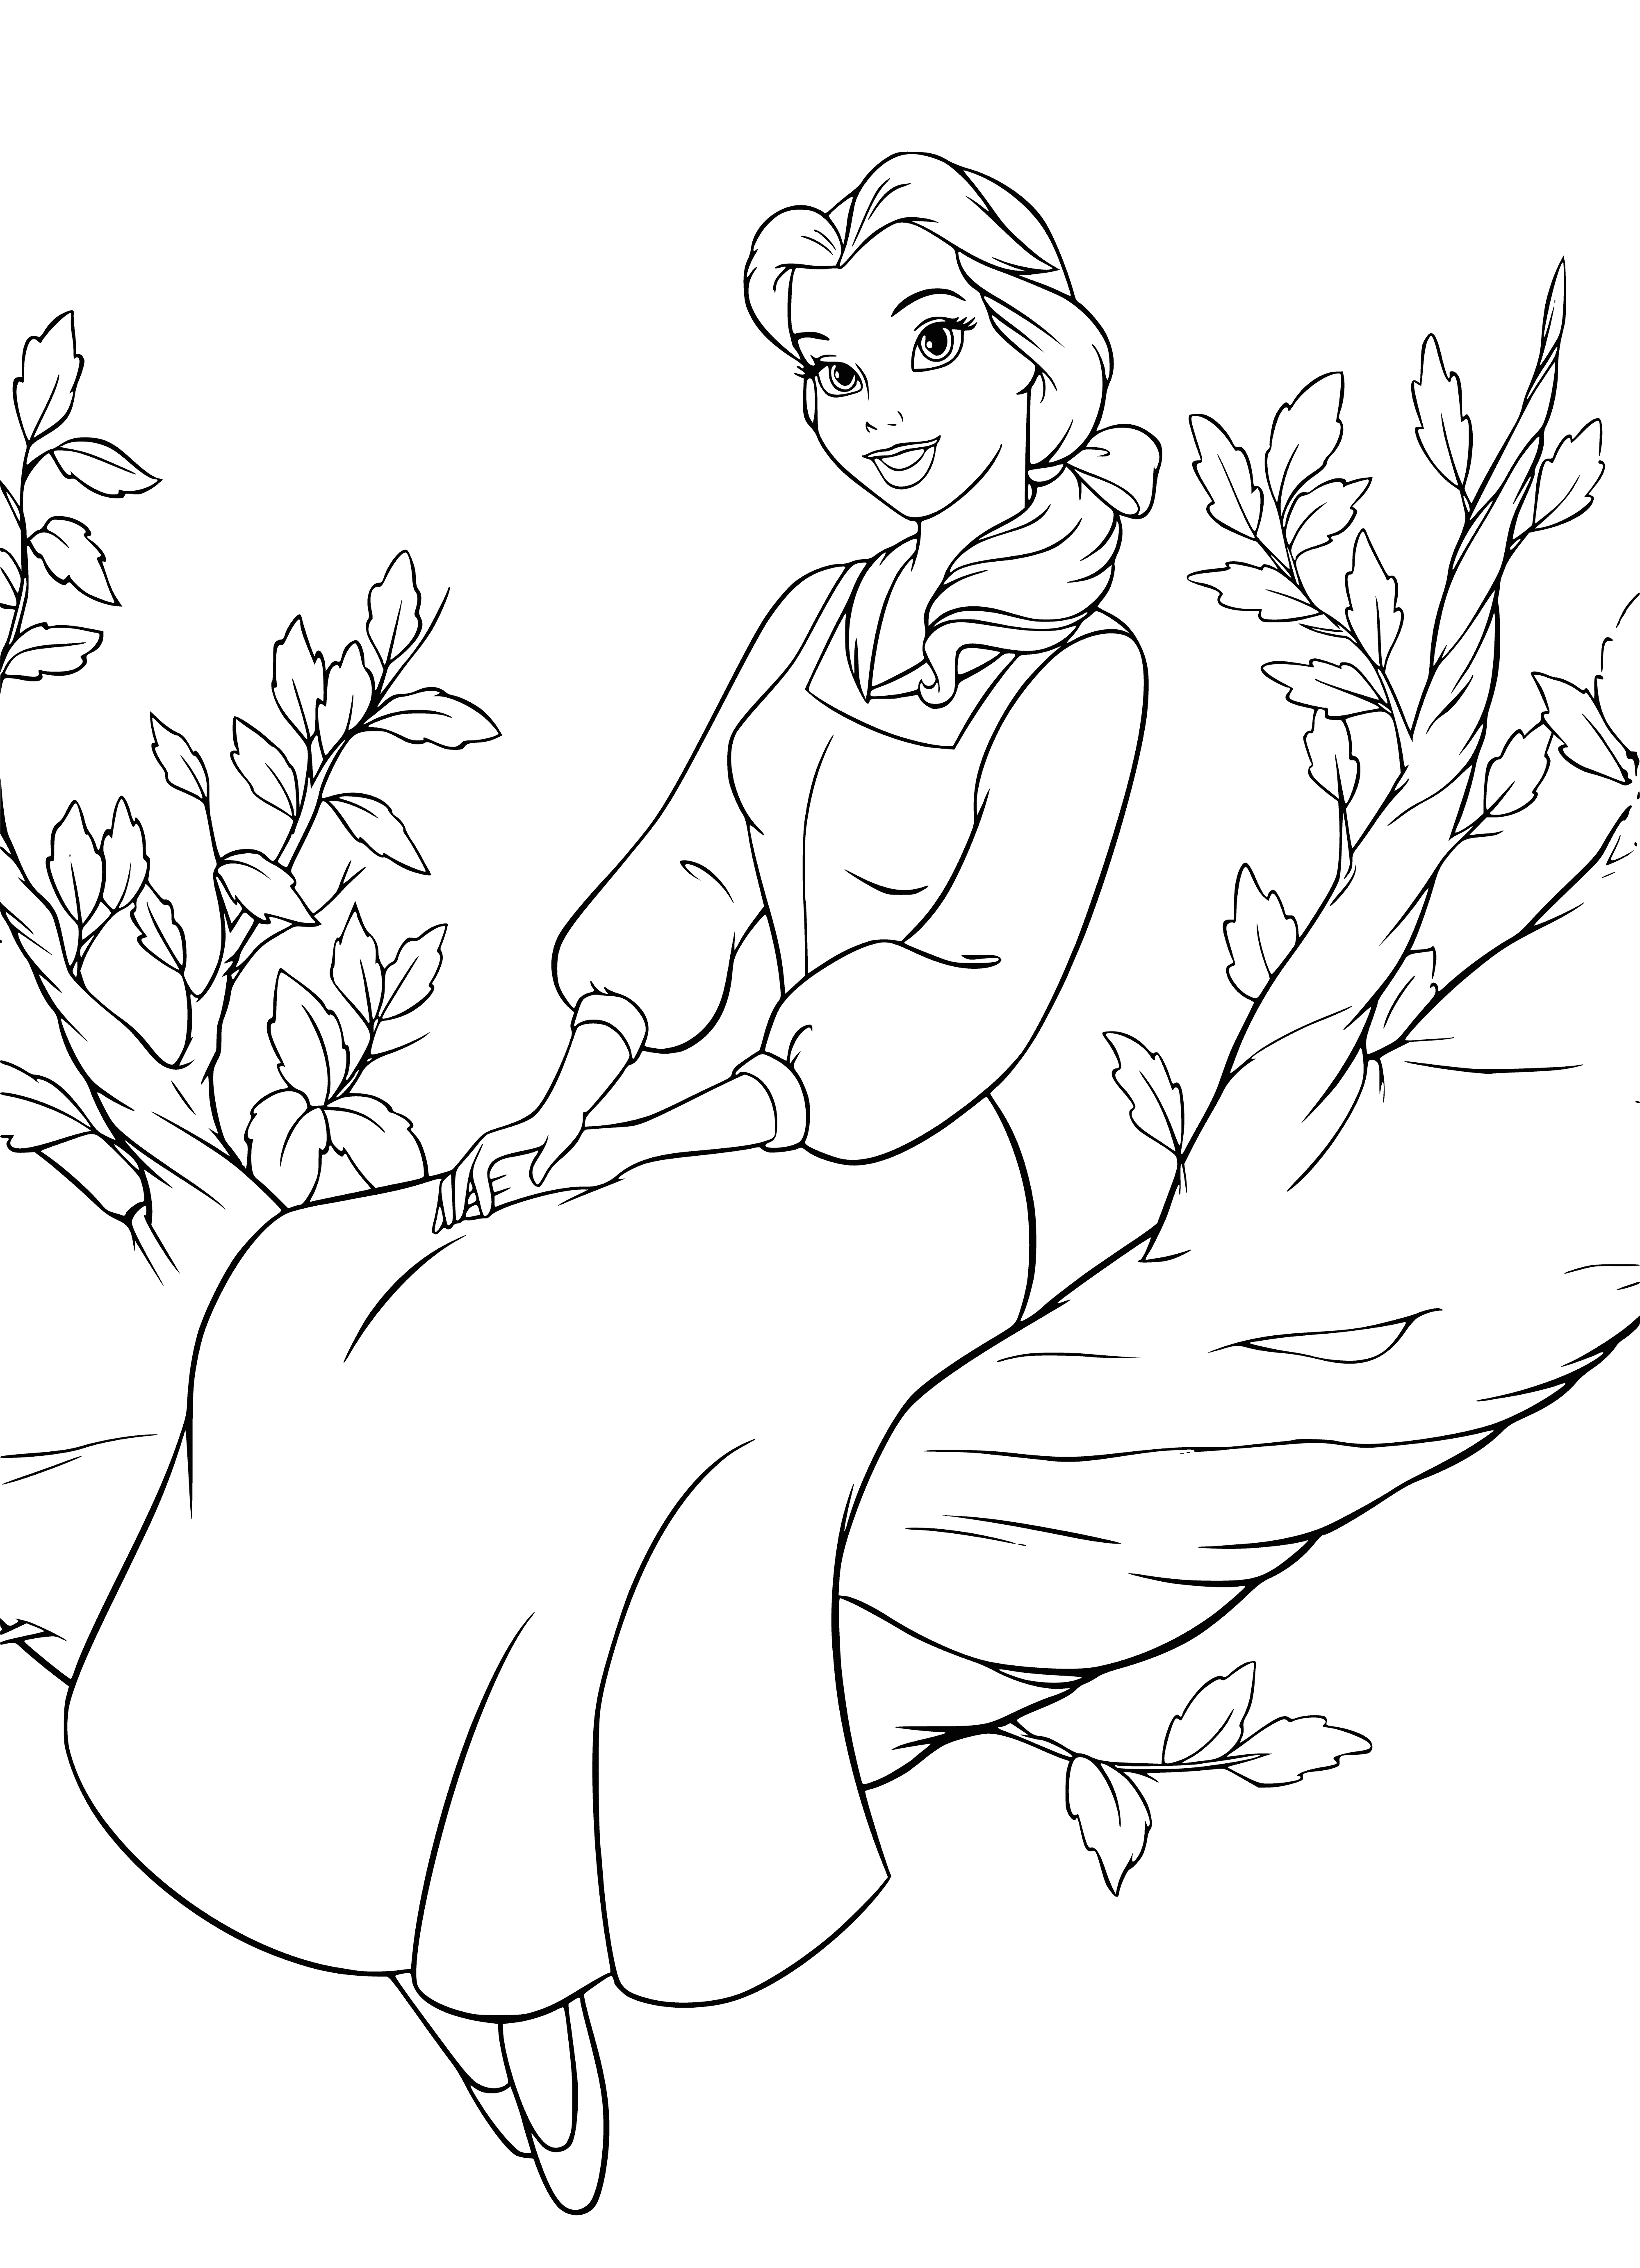 Belle in the garden coloring page